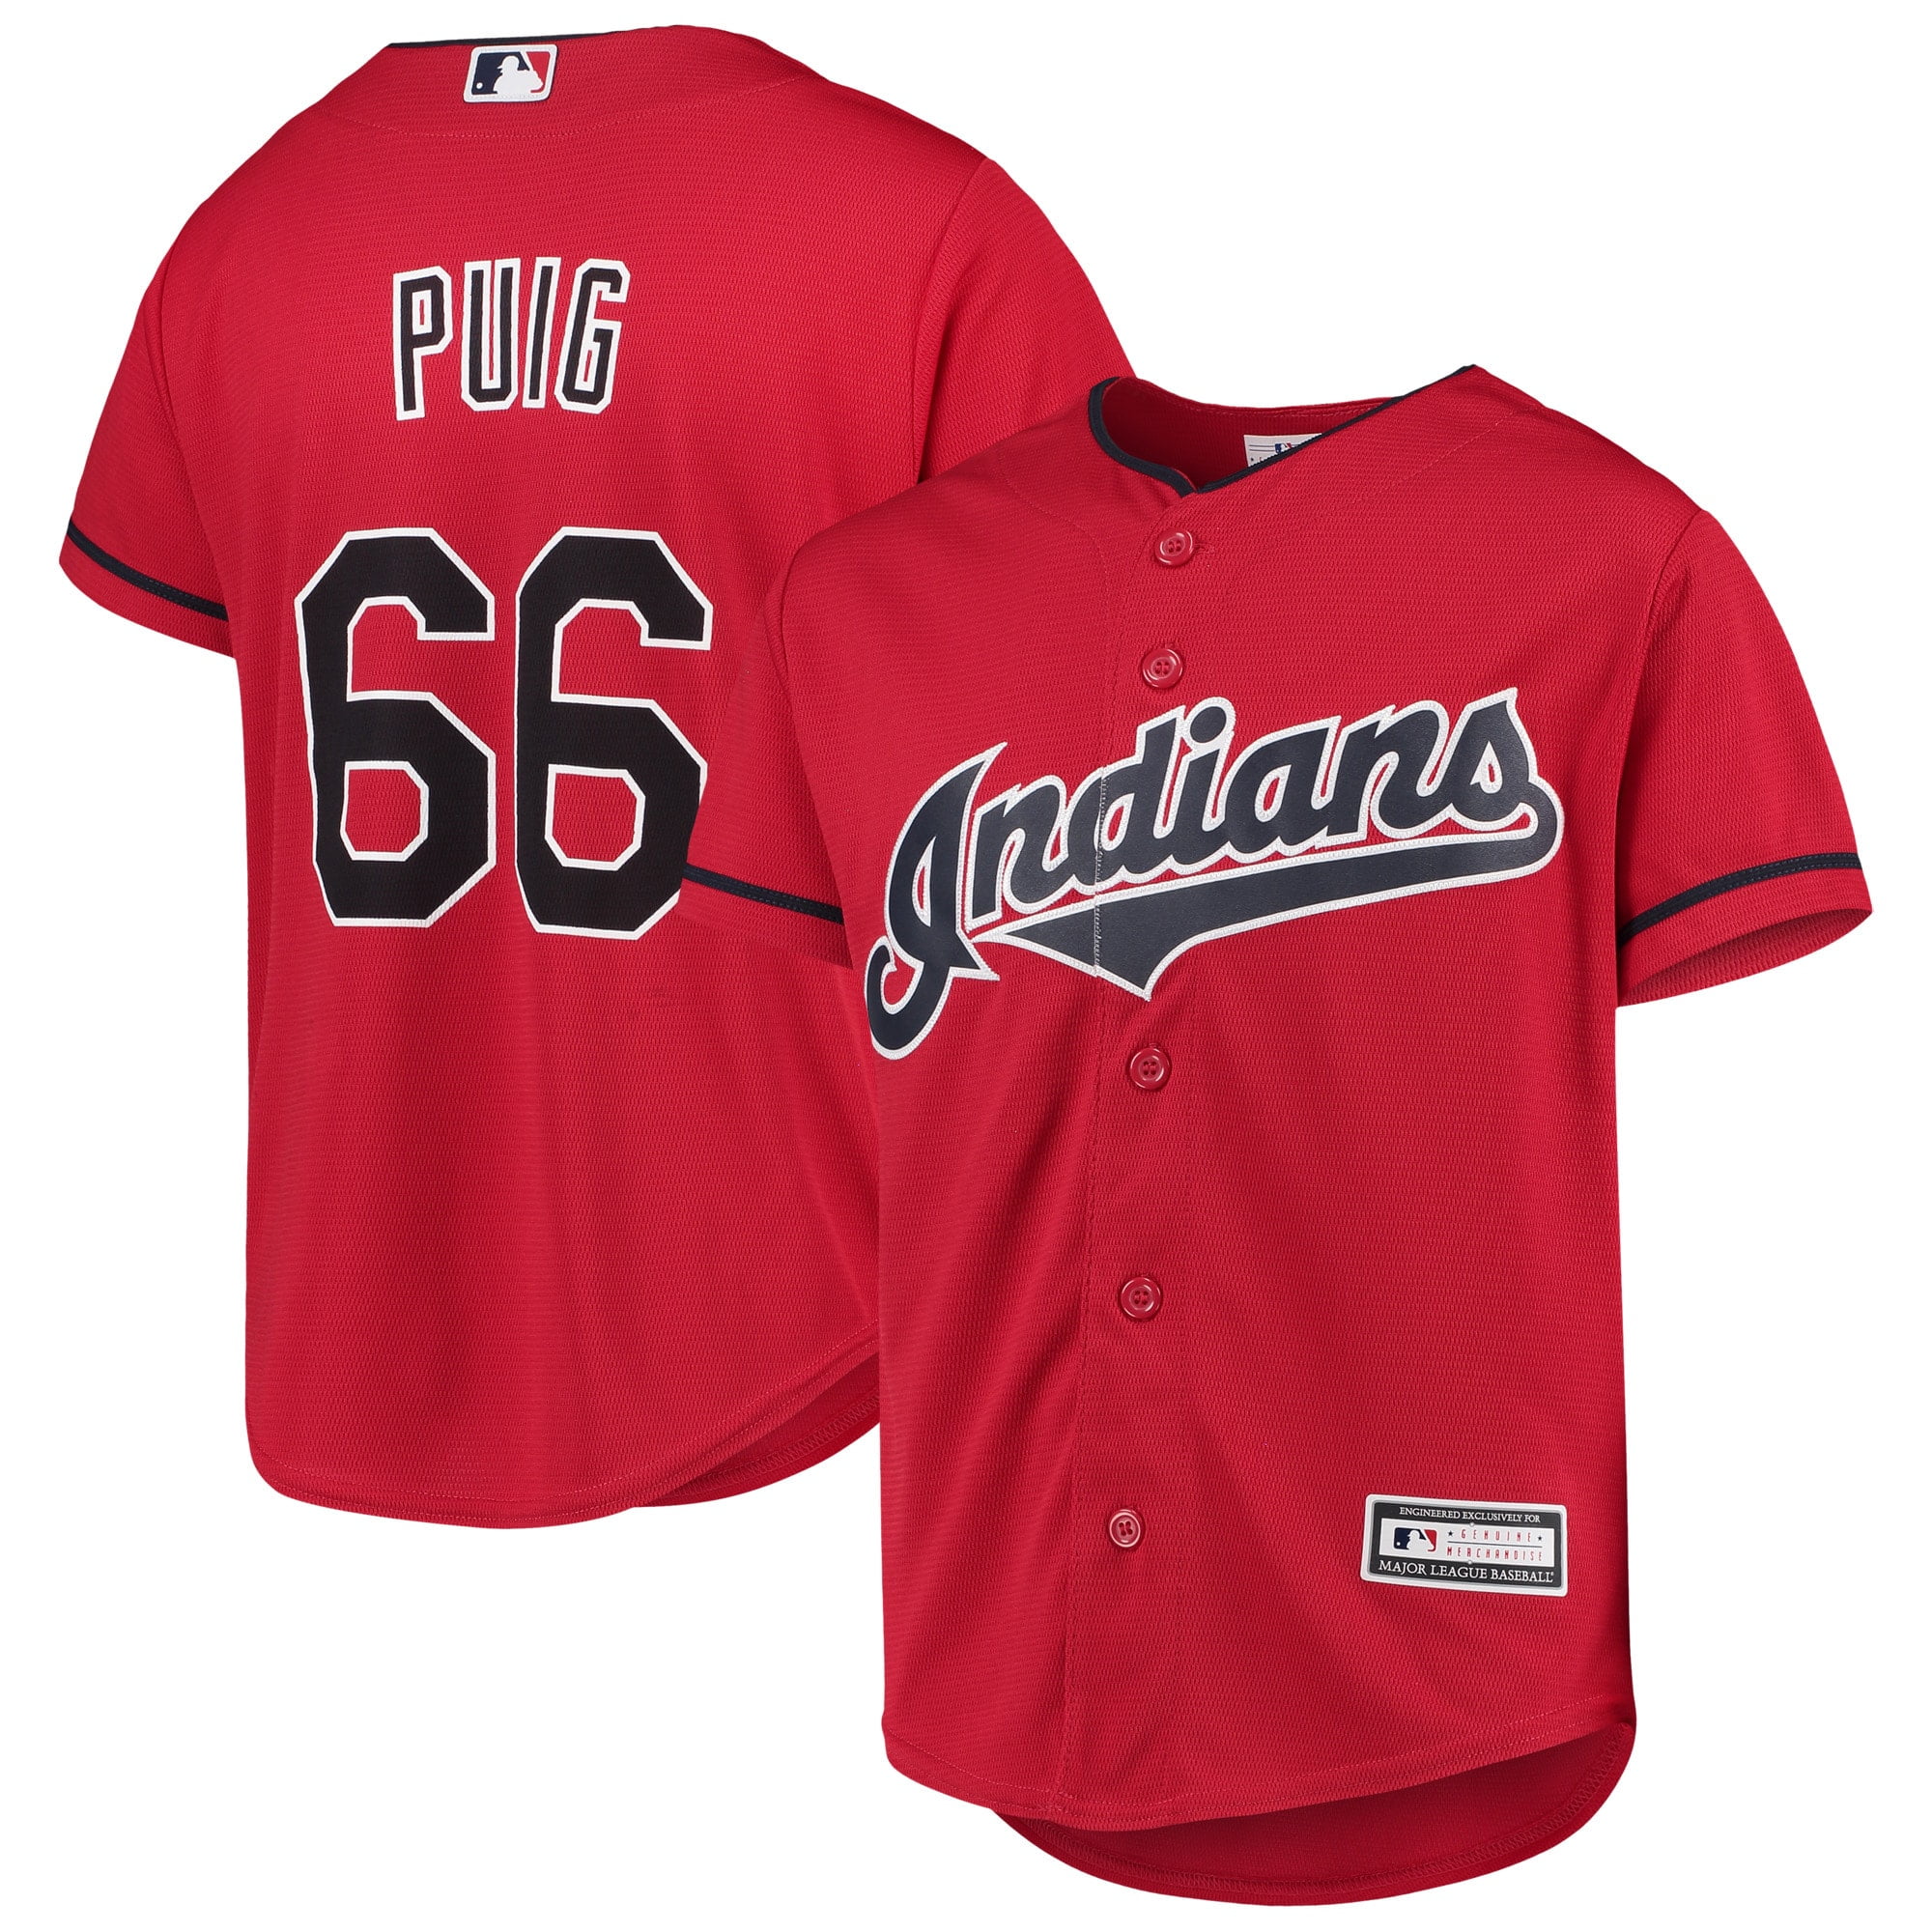 puig jersey youth